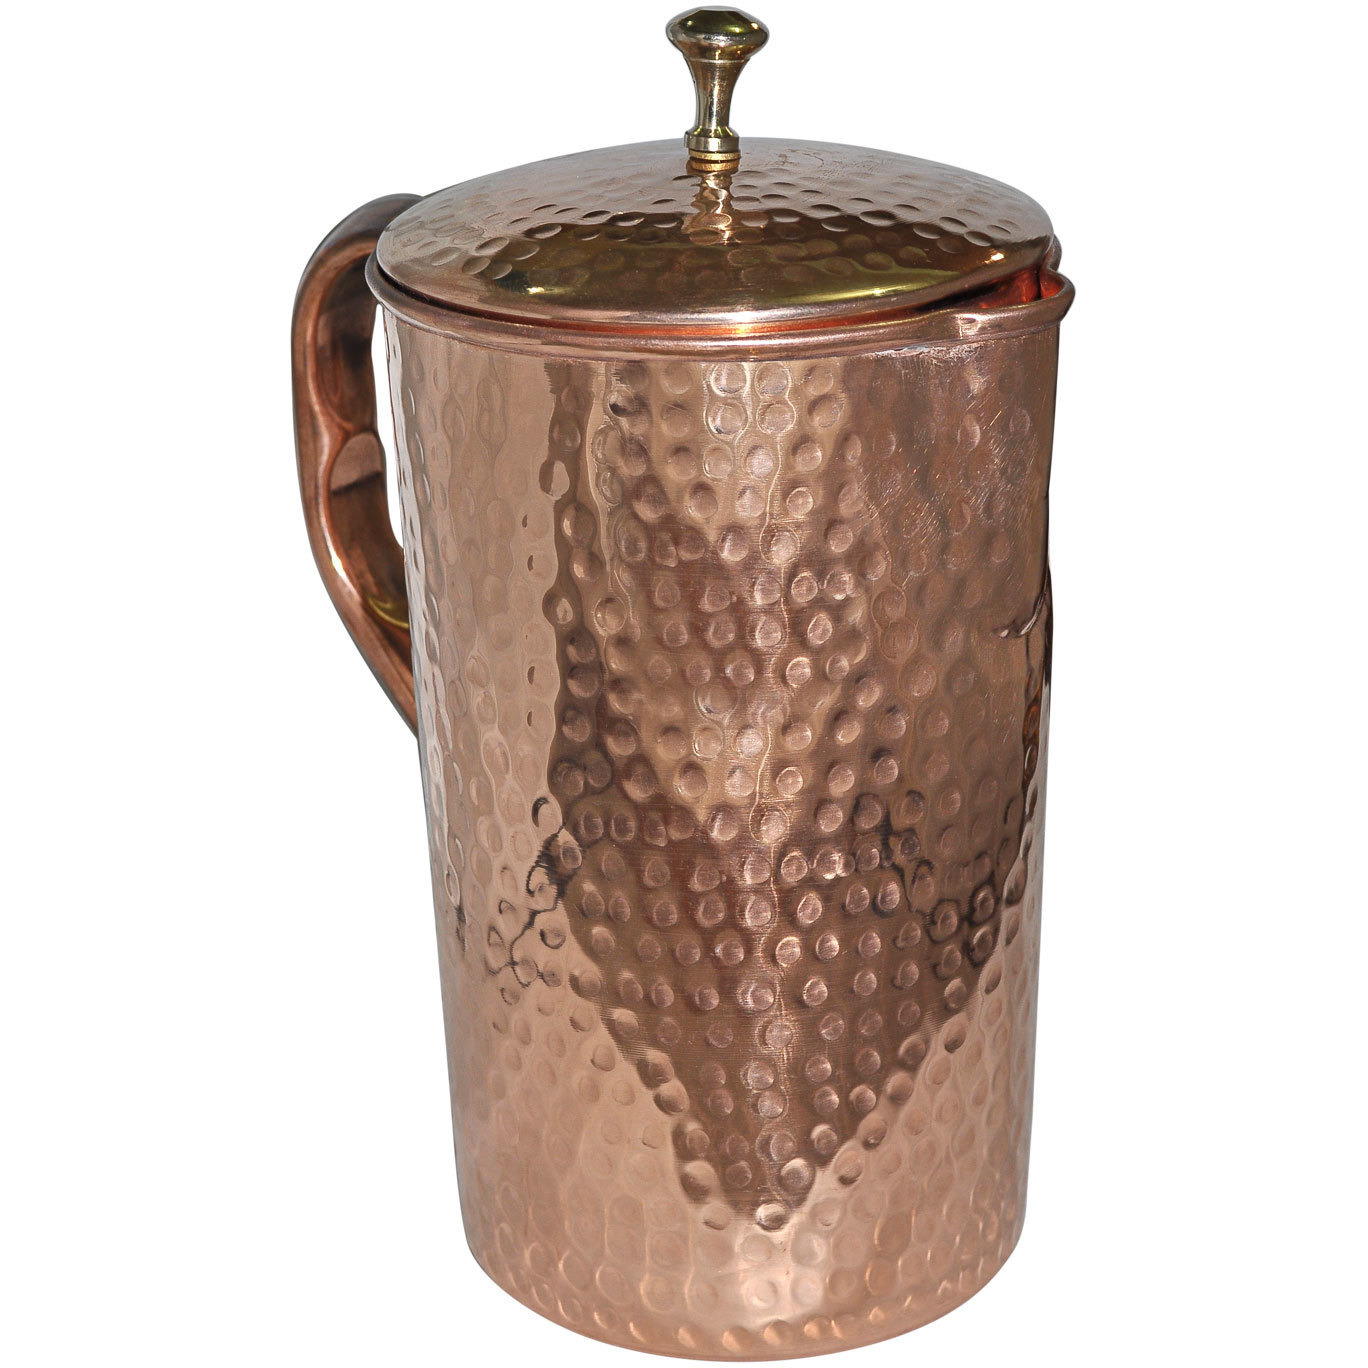 Prisha India Craft B. Best Quality Pure Copper Jug Water Pitcher Handmade Indian Copper Utensils for Ayurveda Healing Capacity 1.6 L